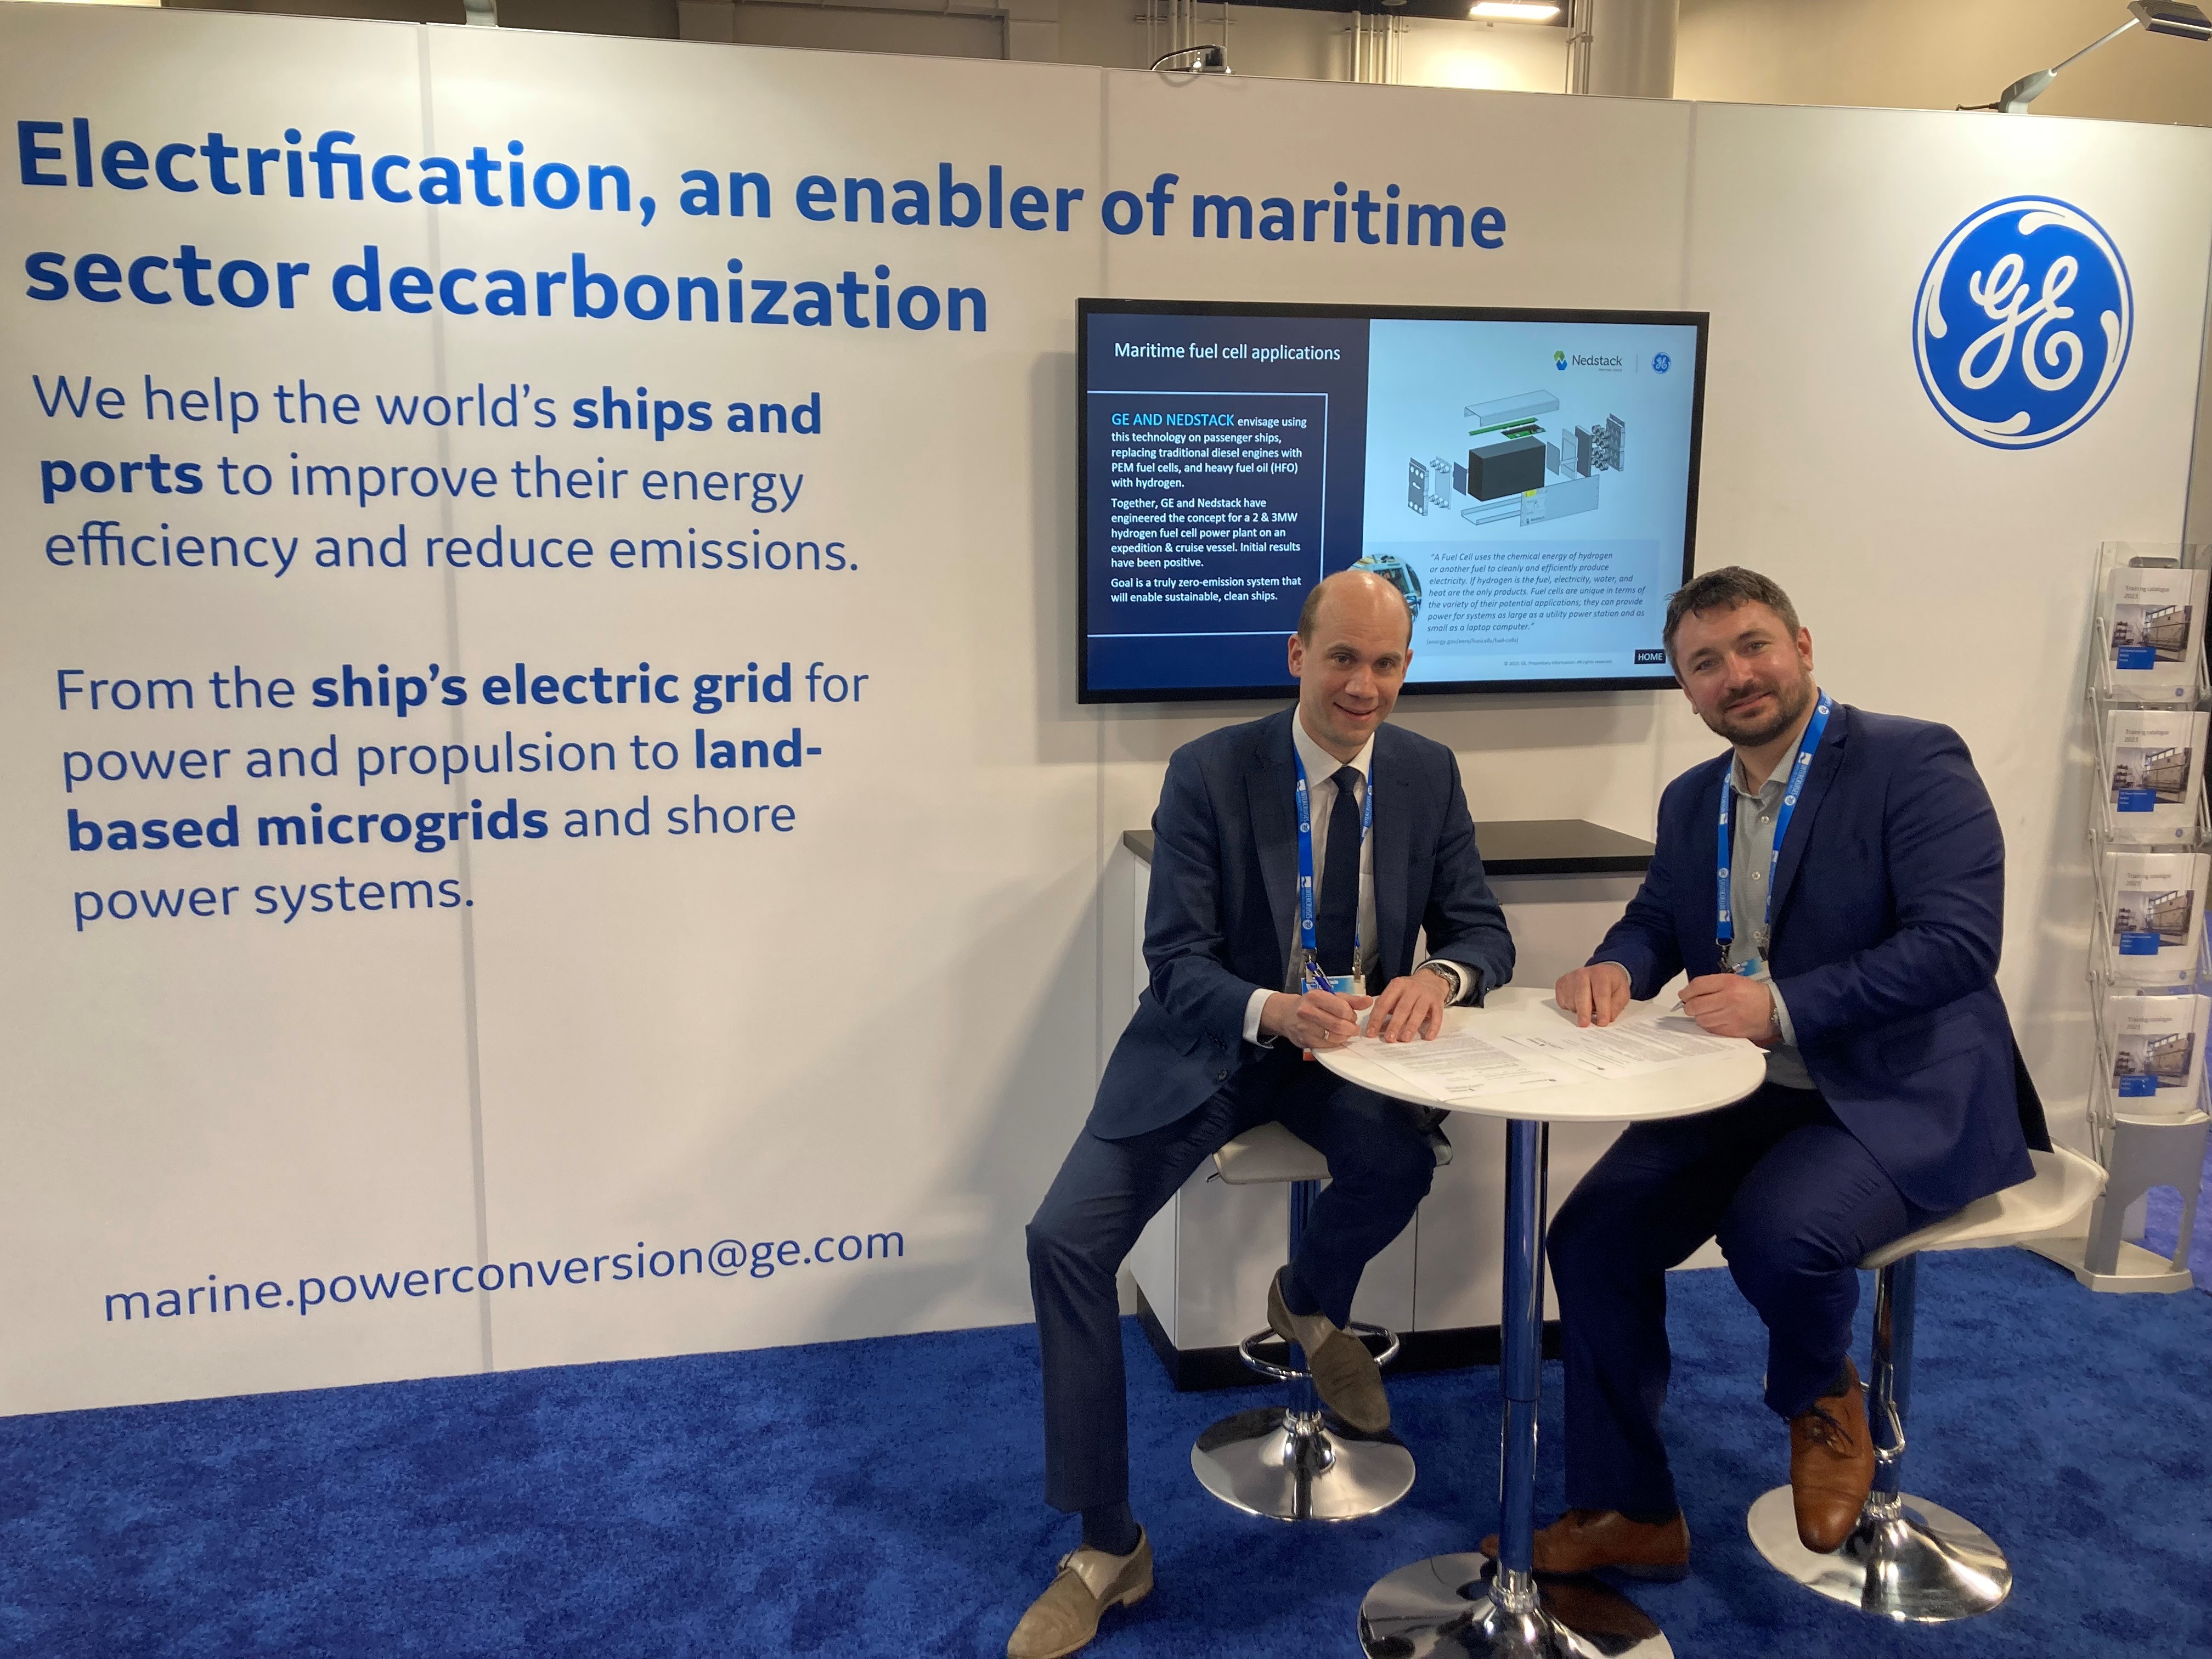 GE Power Conversion renews its Partnership Agreement with Nedstack Fuel Cell Technology for the development of marine fuel cell solutions